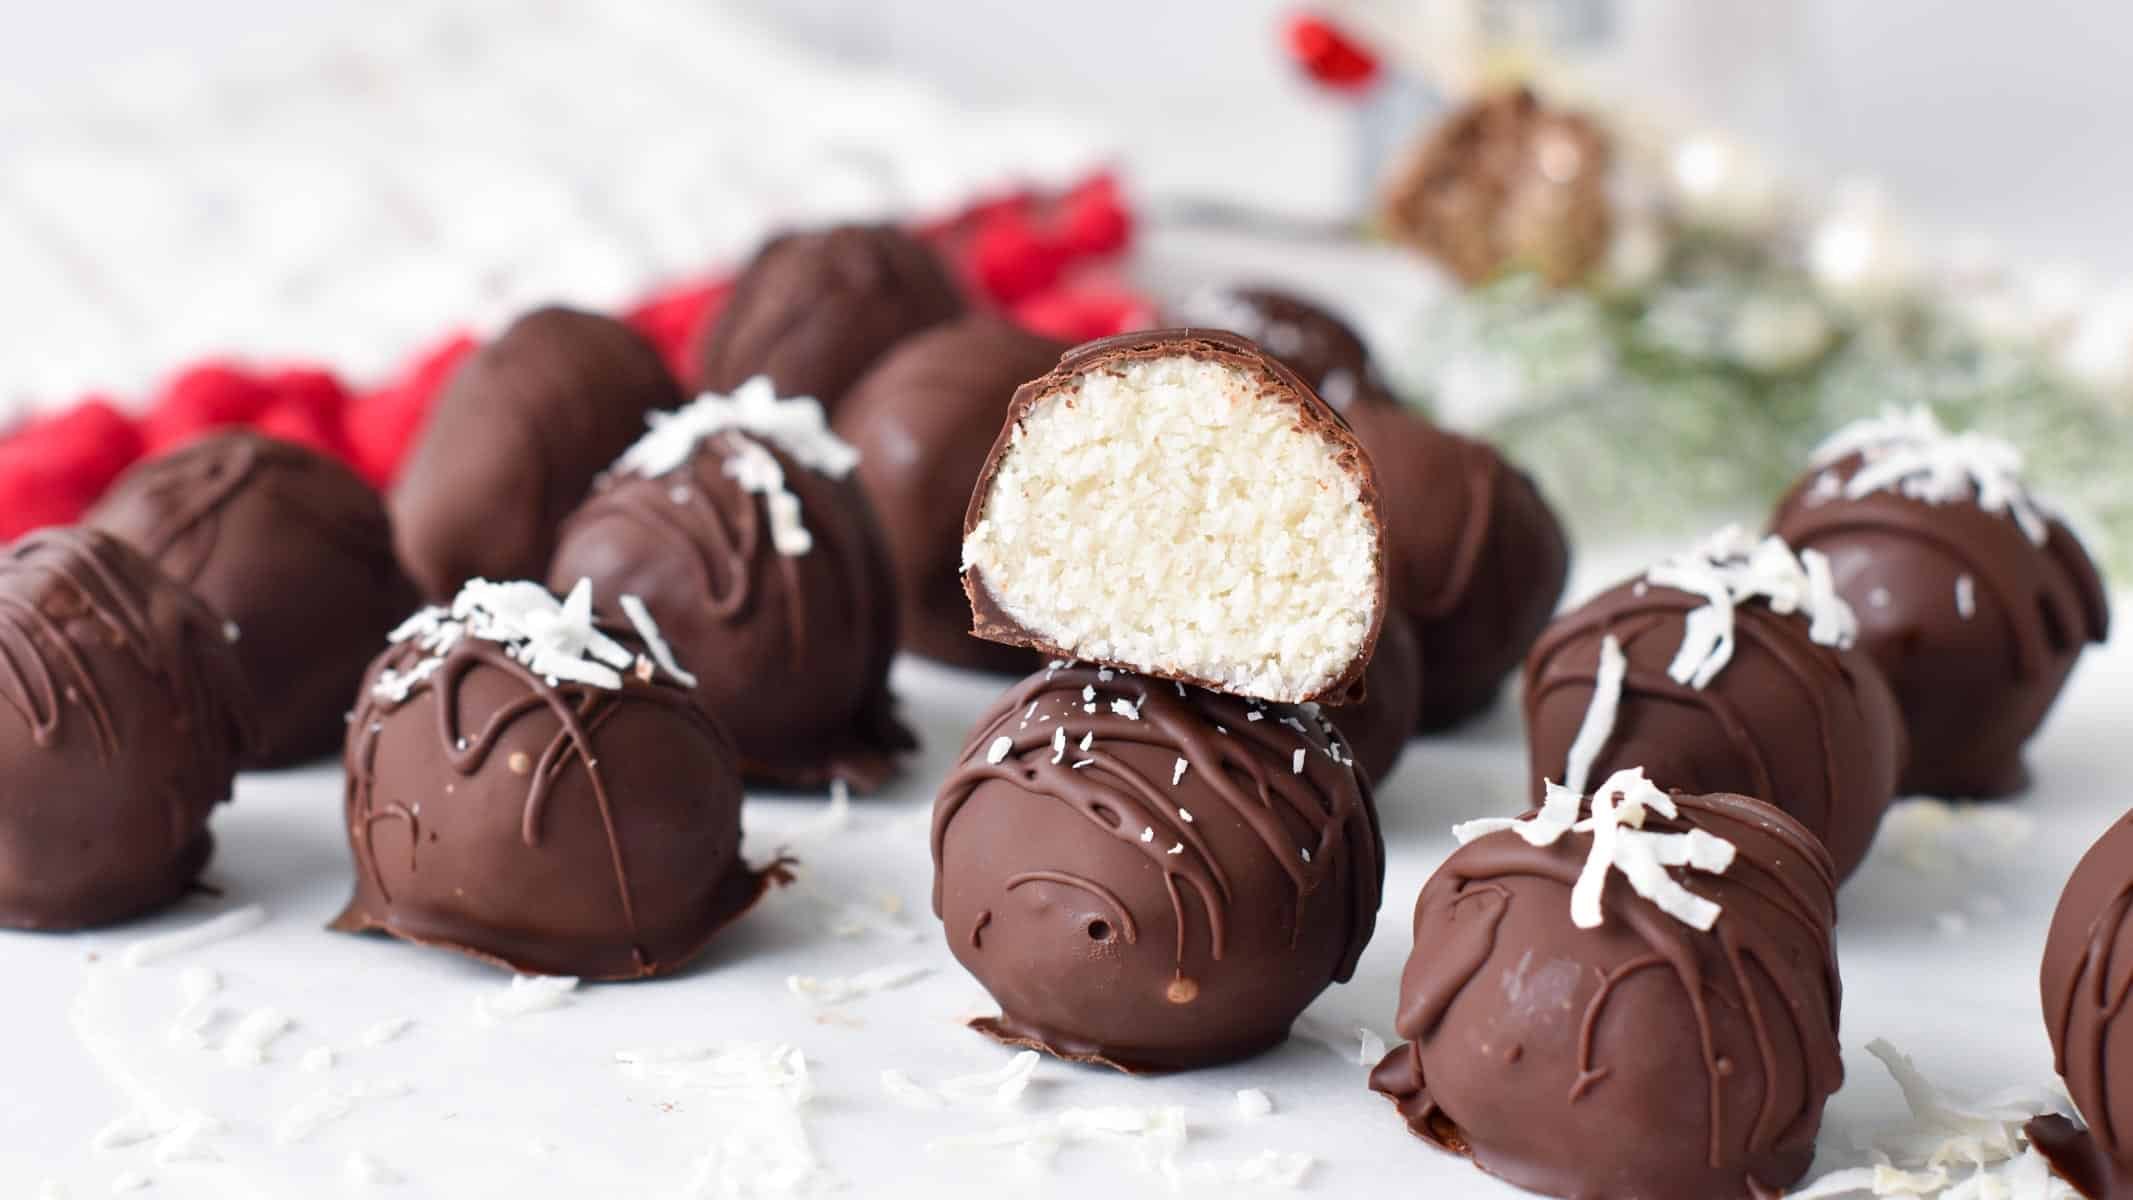 a stack of chocolate coconut balls with one balls cut halfway showing the coconut mixture inside